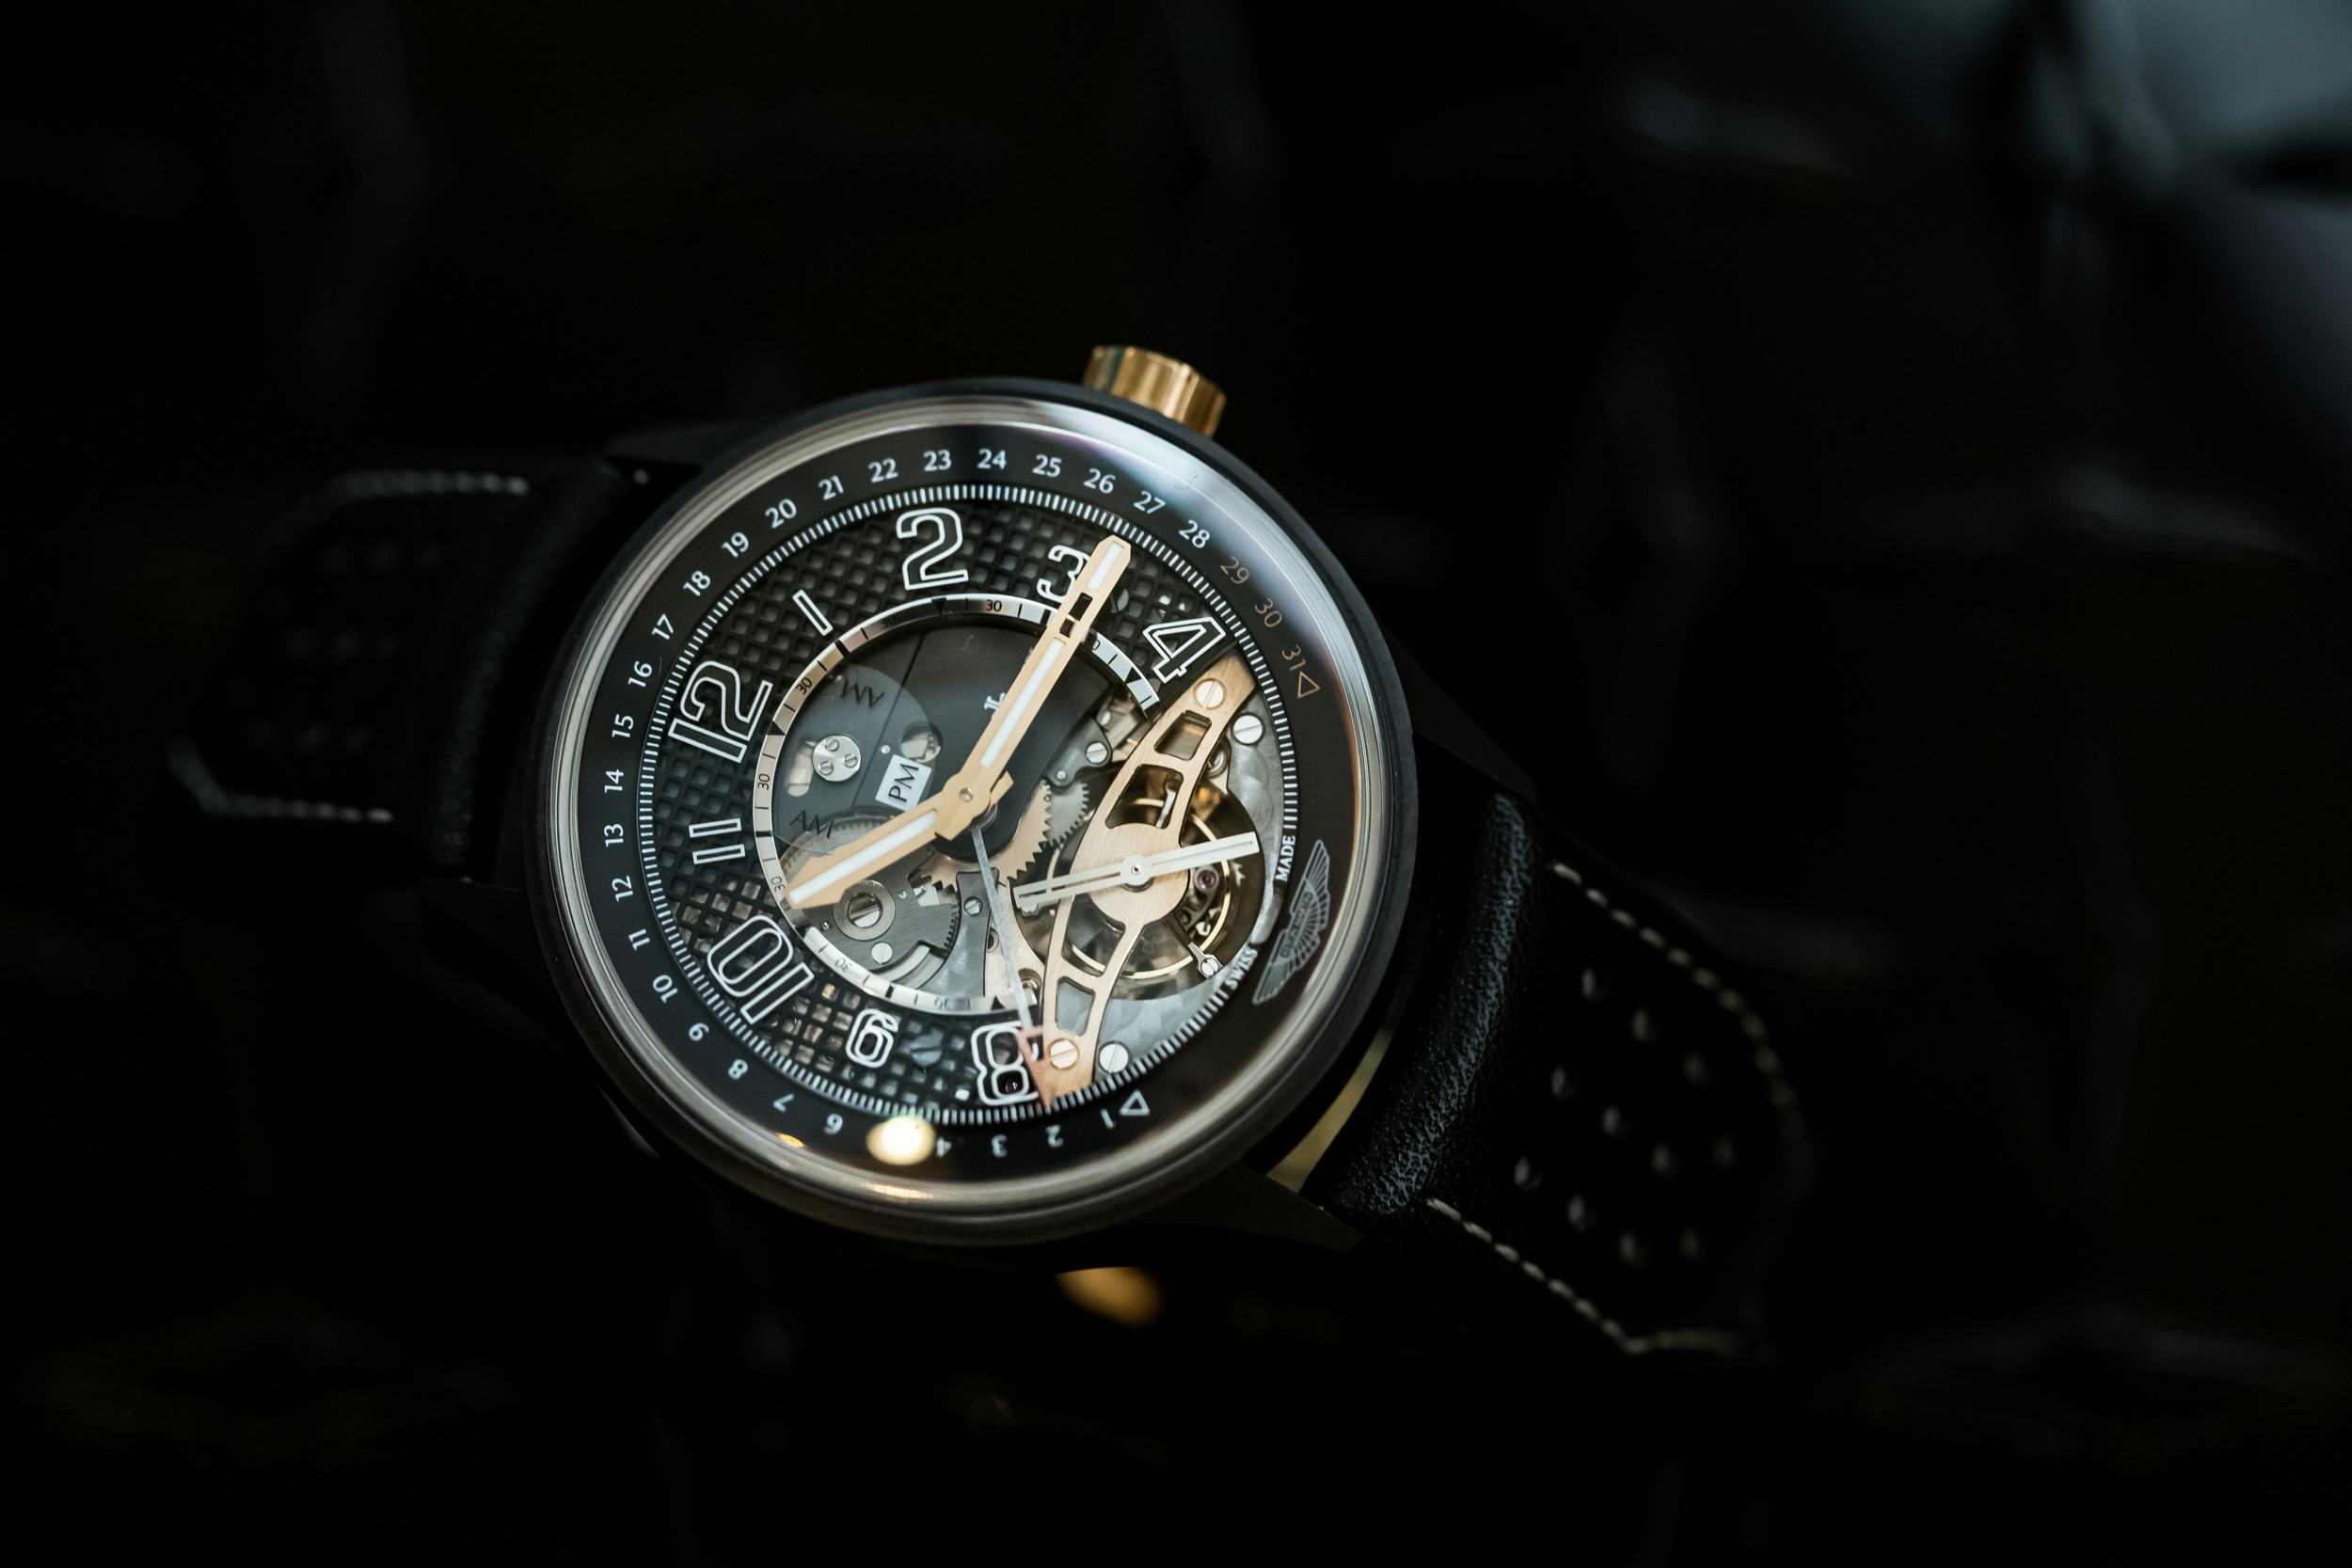 Jaeger-LeCoultre’s Amvox III sets the standard for luxury watches